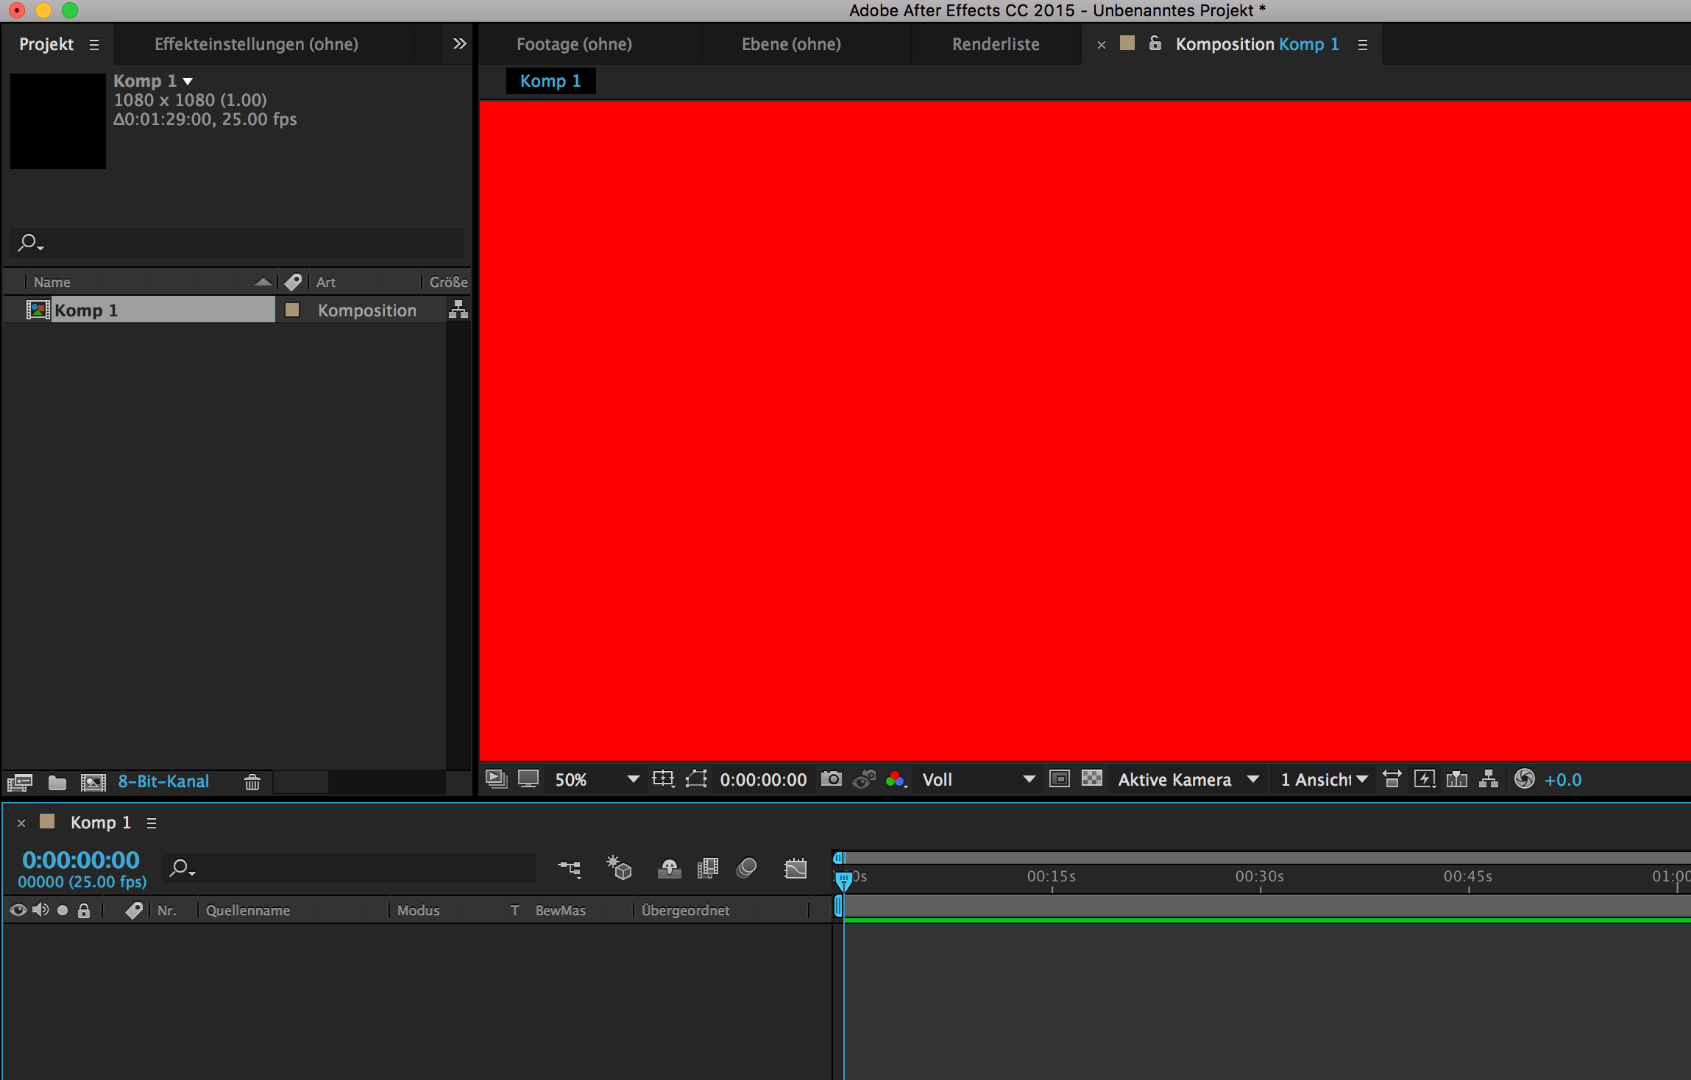 Adobe After Effects: Strange red use... - Adobe Support Community - 10012227